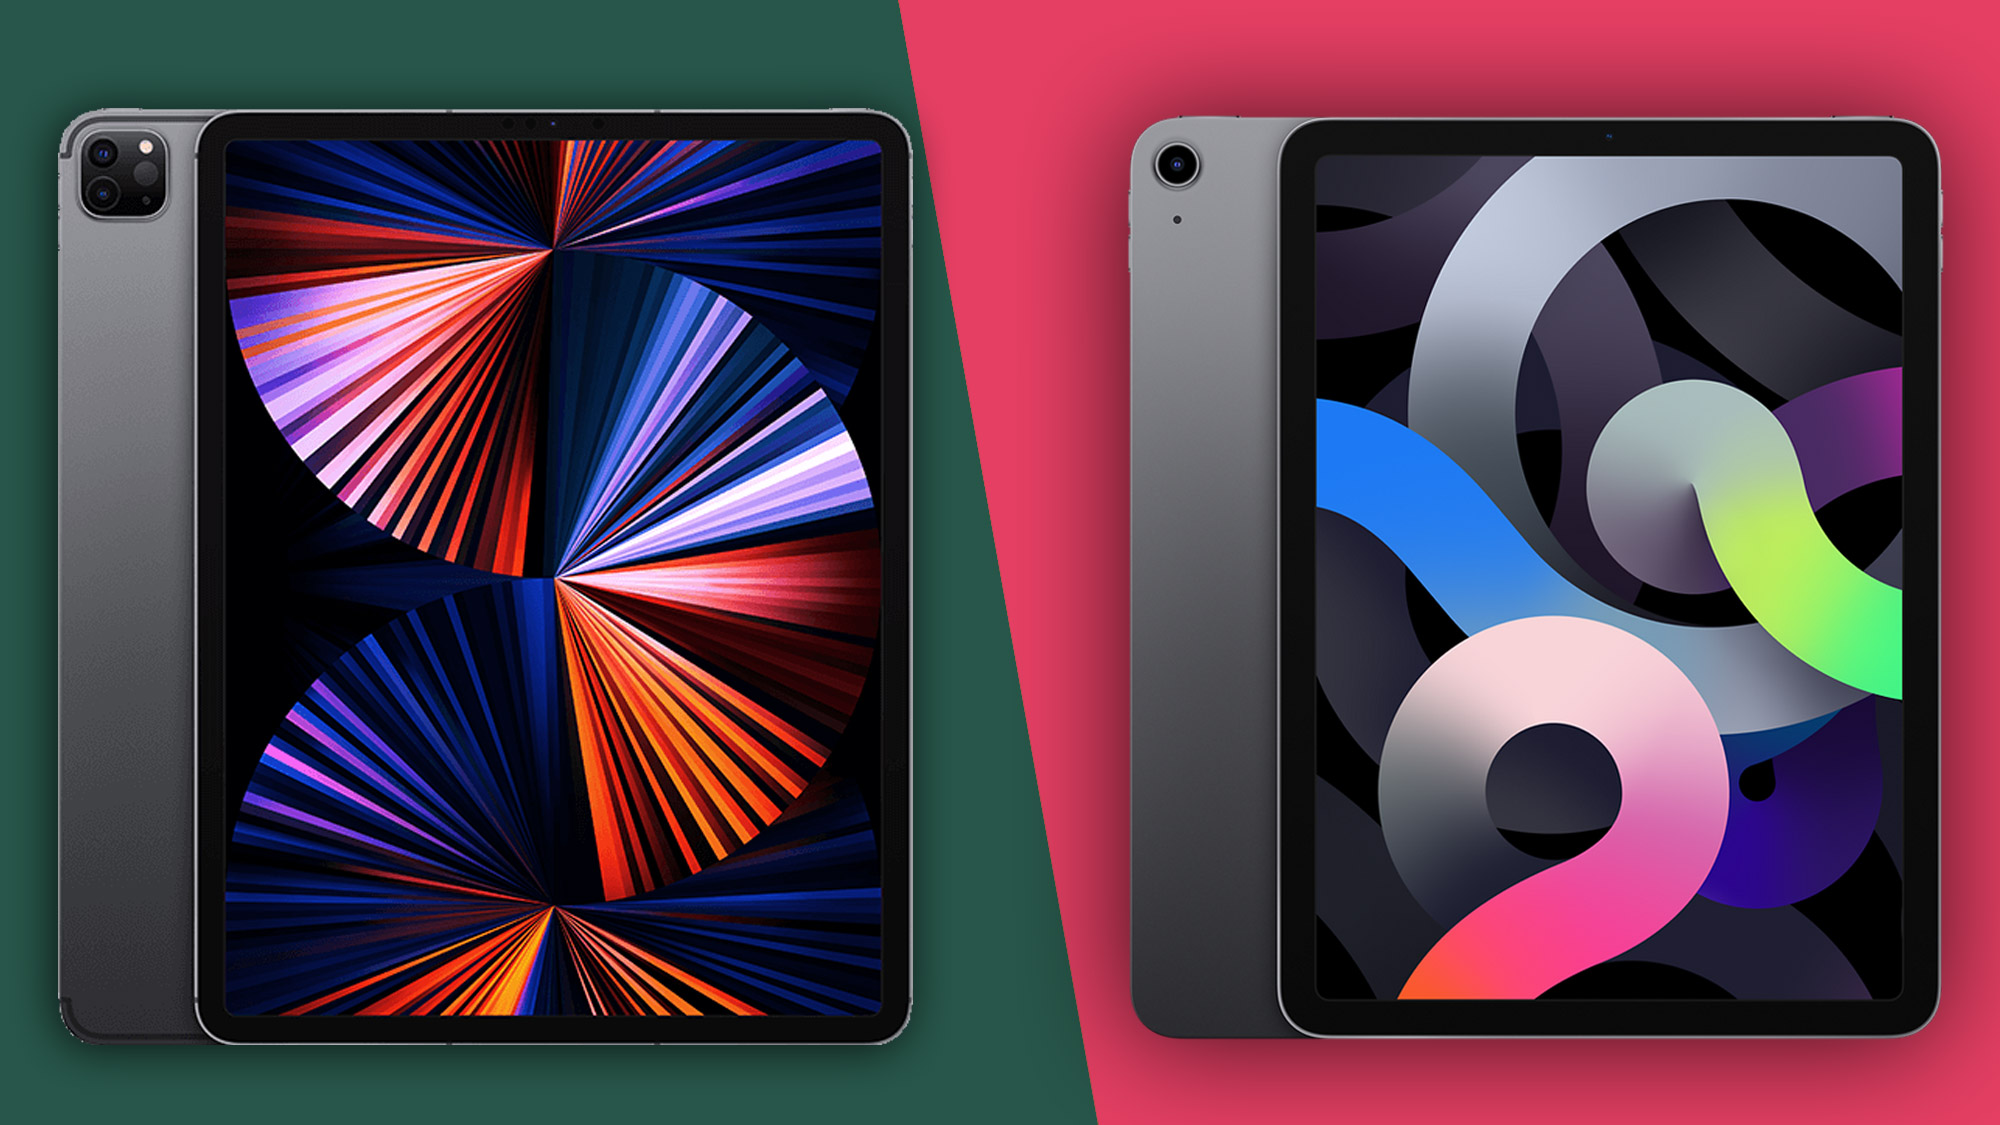 iPad Pro 12.9 (2021) vs iPad Air 4 which tablet is made for you